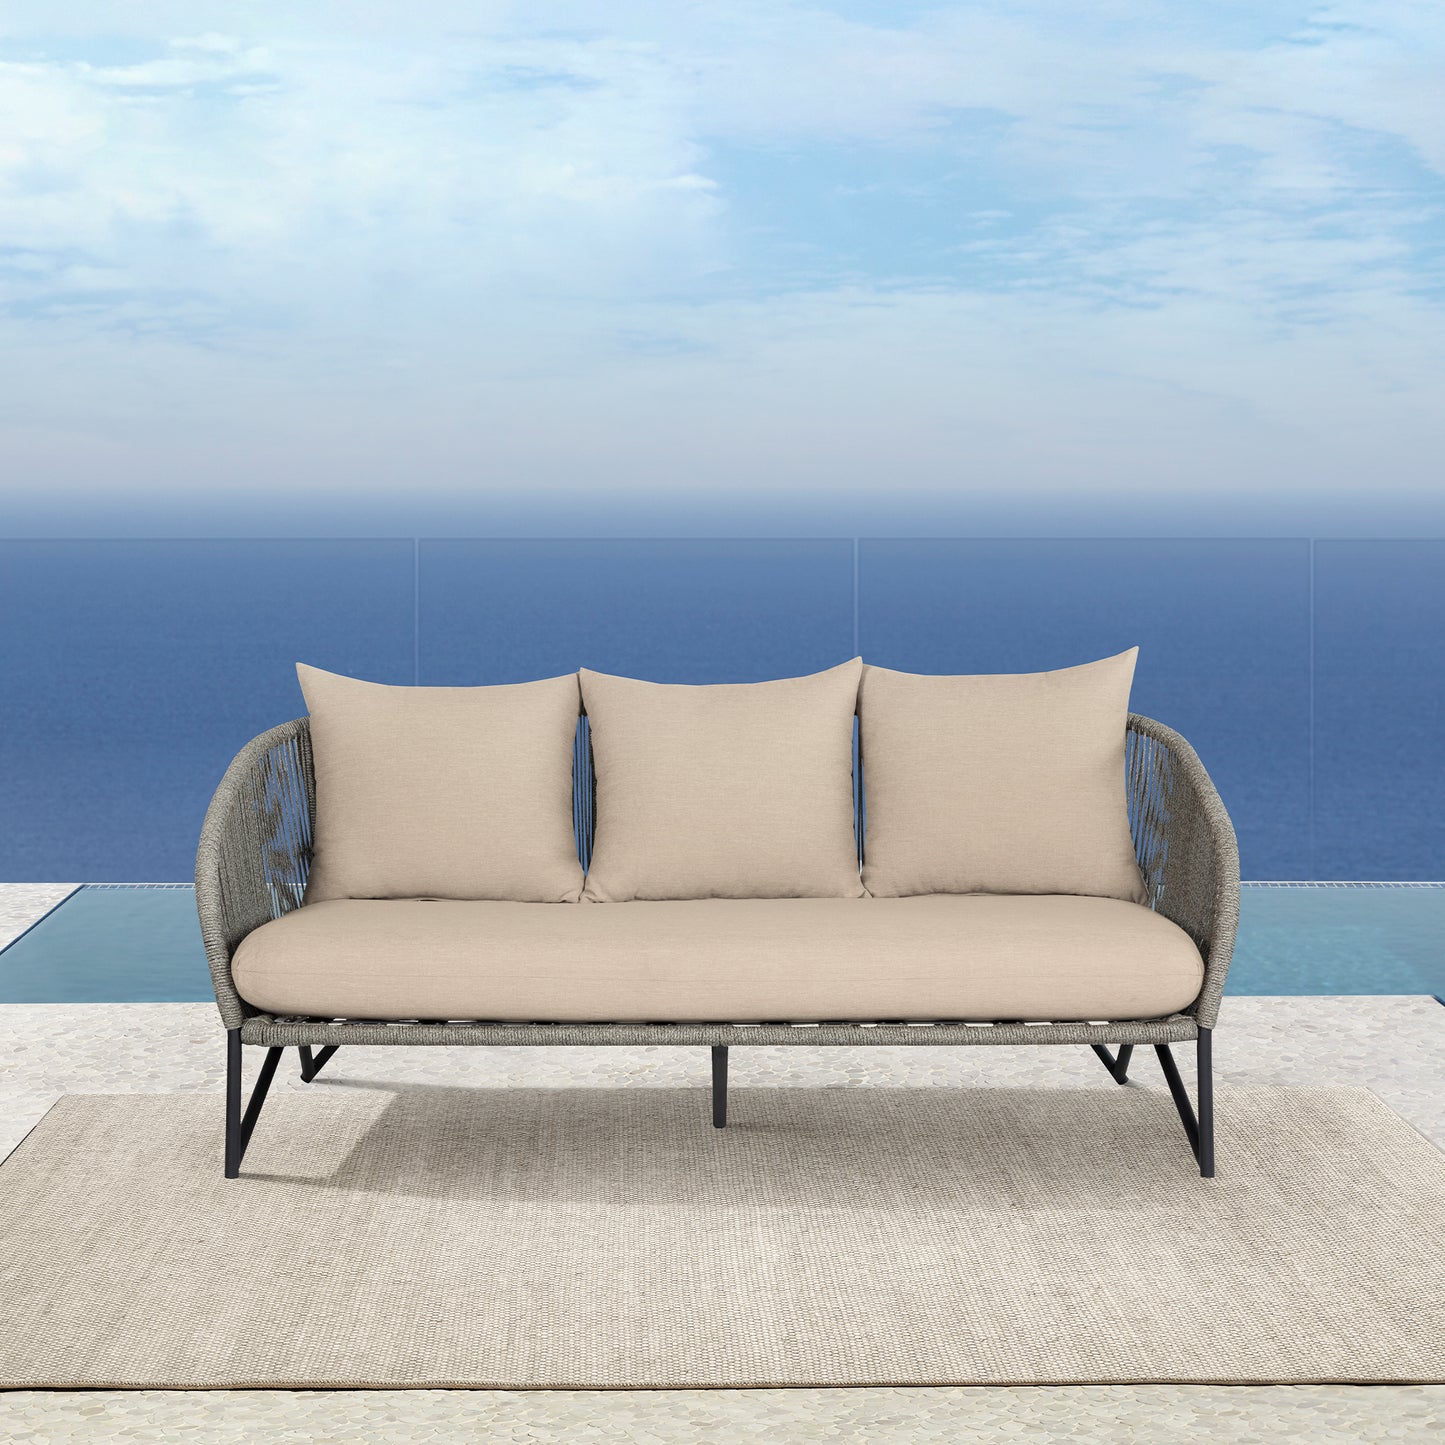 Benicia Outdoor Patio Sofa in Black Steel with Gray Rope and Taupe Olefin Cushions